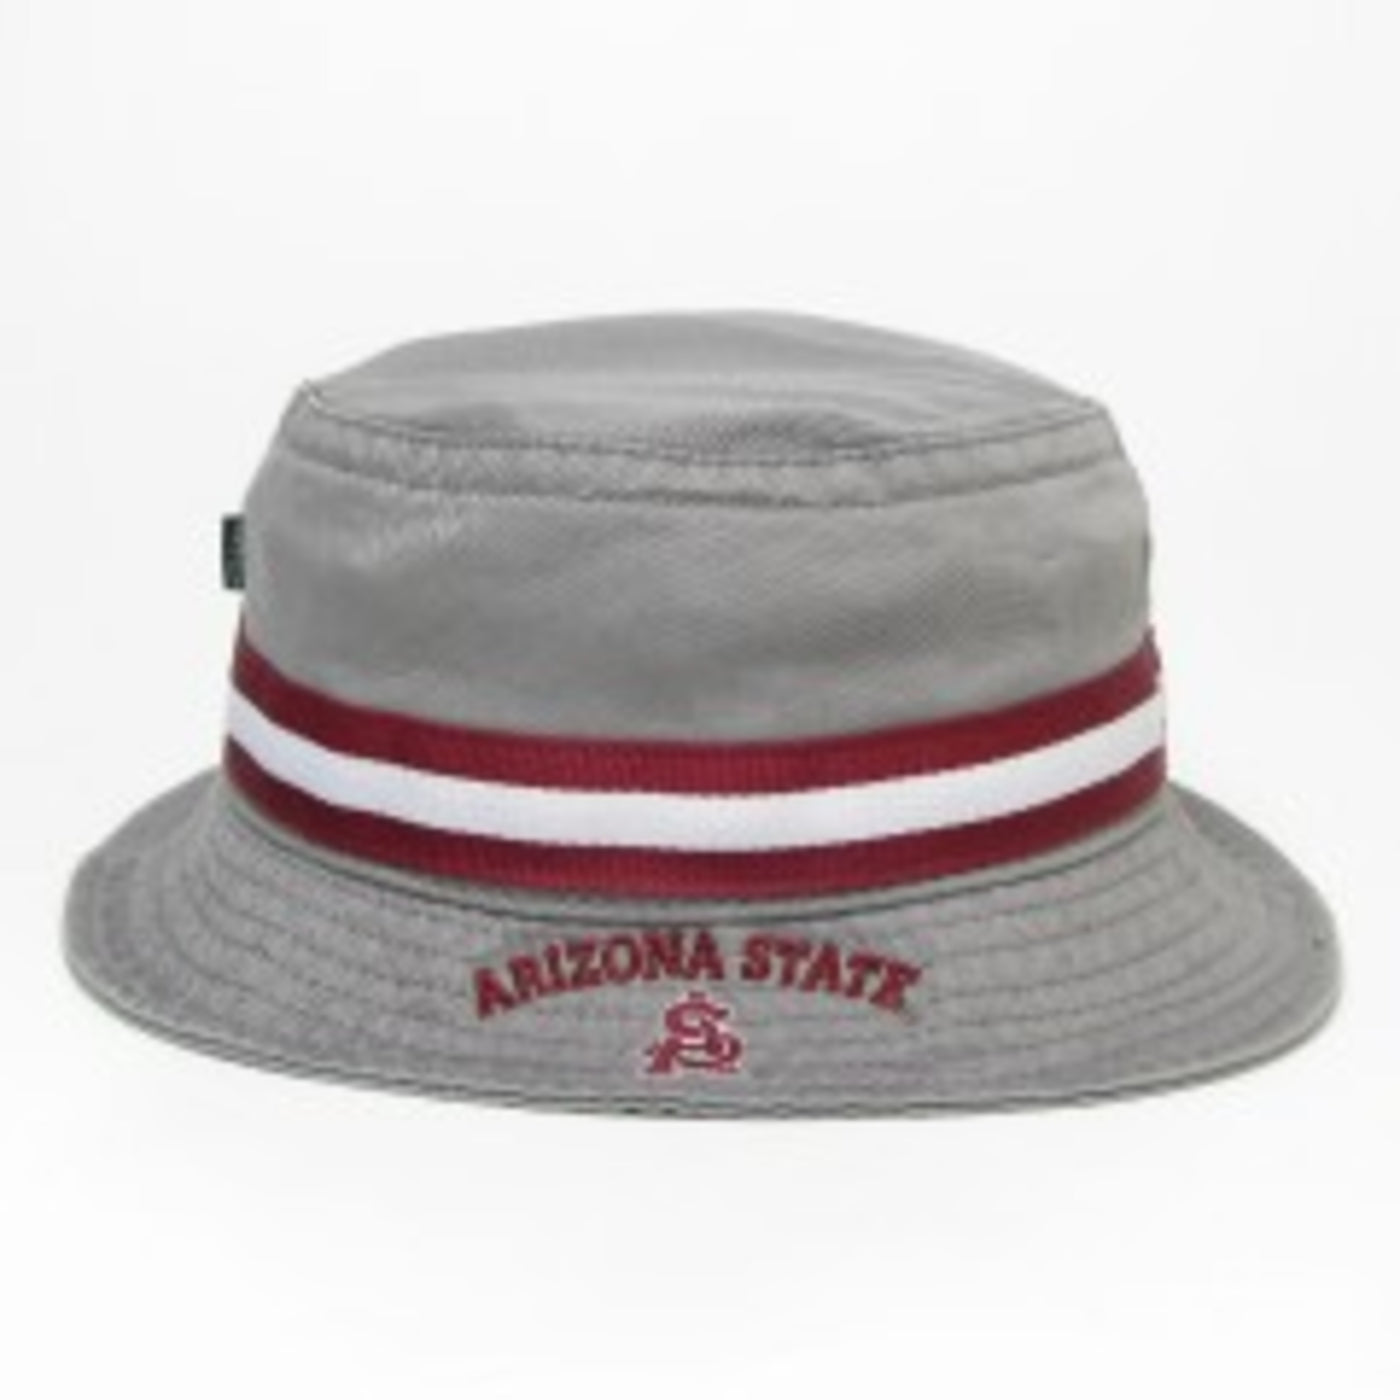 ASU grey bucket hat. Features maroon A and S logo with maroon Arizona State text on the brim. Maroon and White stripes on the base of the hat's body. 